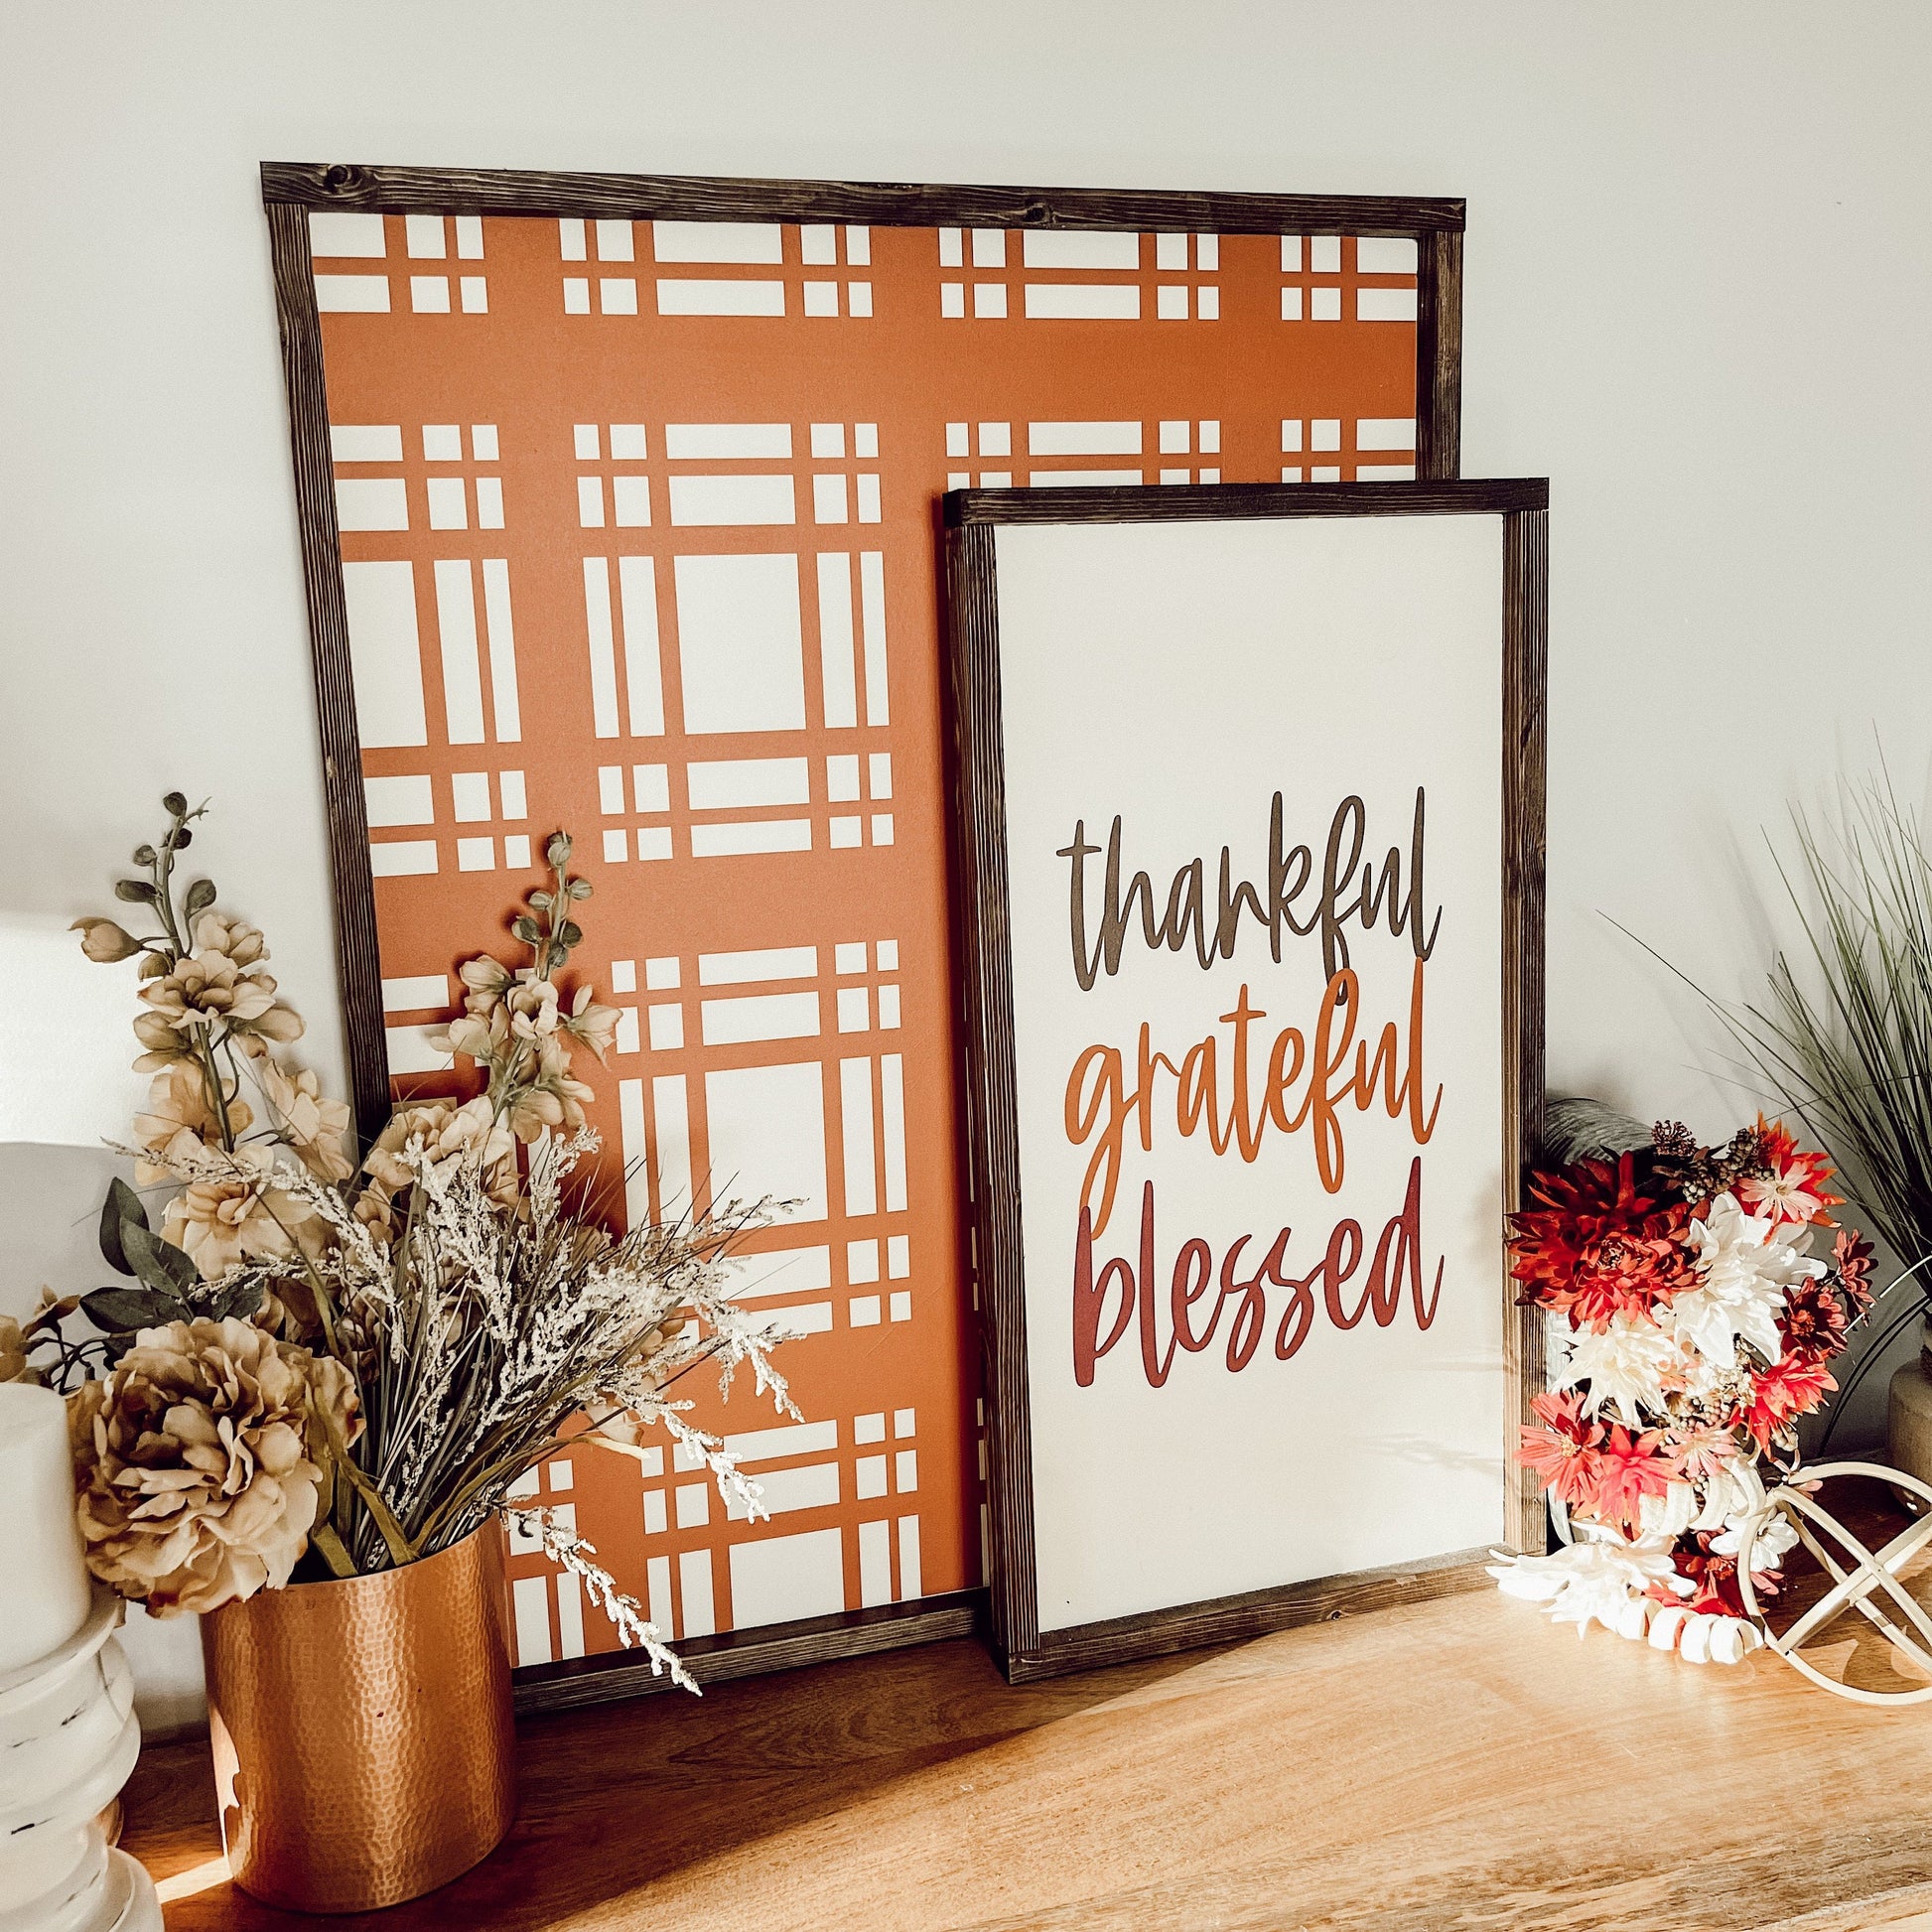 Autumn Bundles! Decorative background with thankful grateful blessed wood signs [FREE SHIPPING]